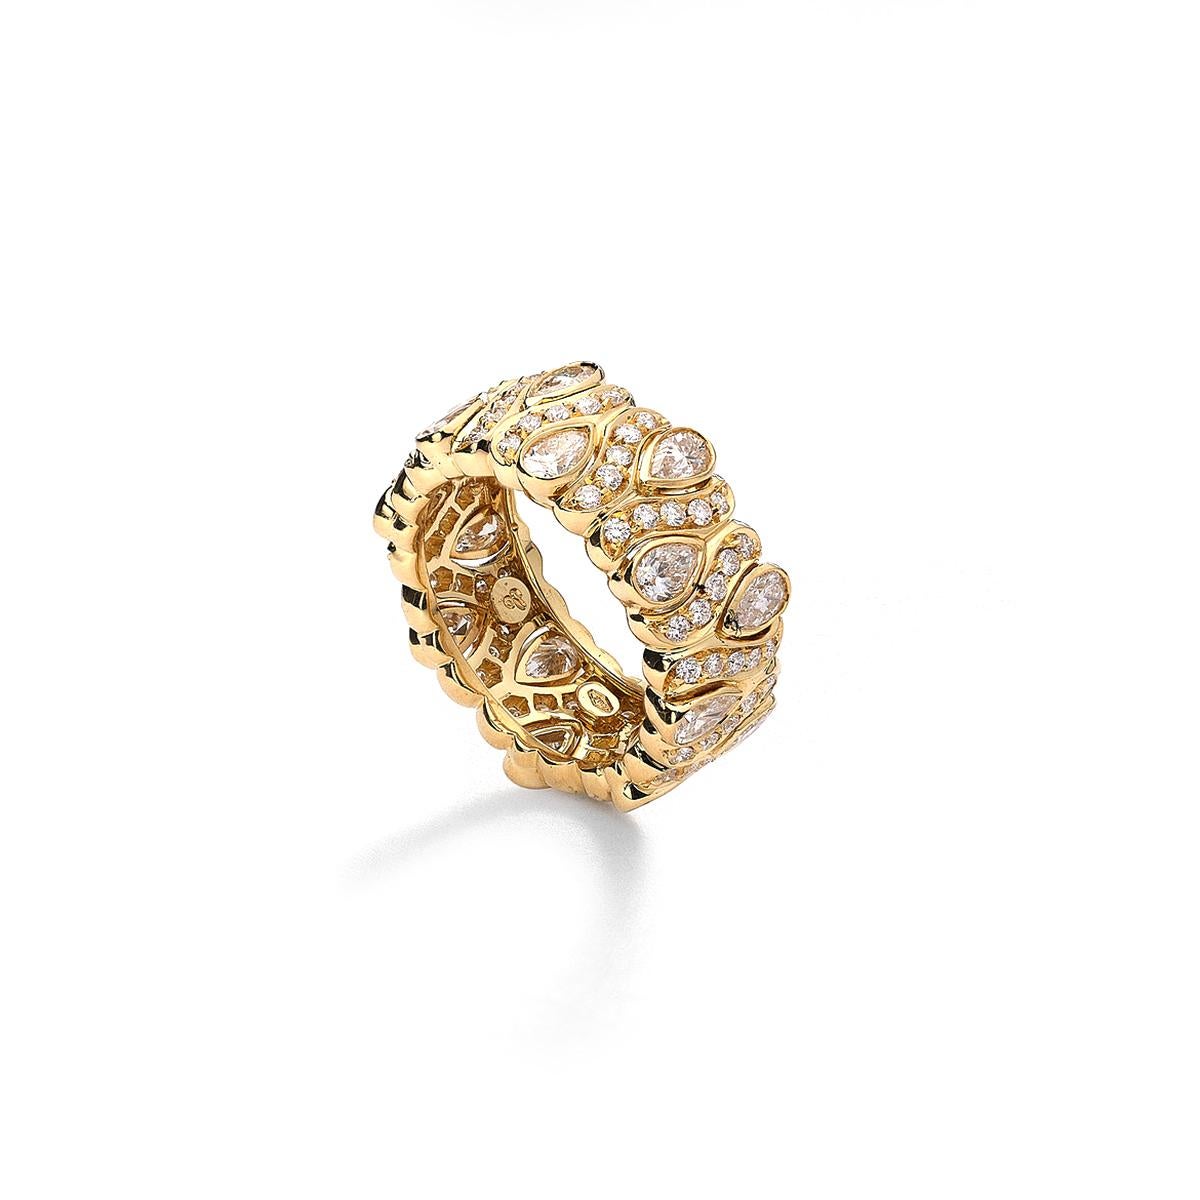 Ring in 18kt yellow gold set with 16 pear-shaped cut diamonds 2.08 cts and 80 diamonds 0.75 cts Size 52,5